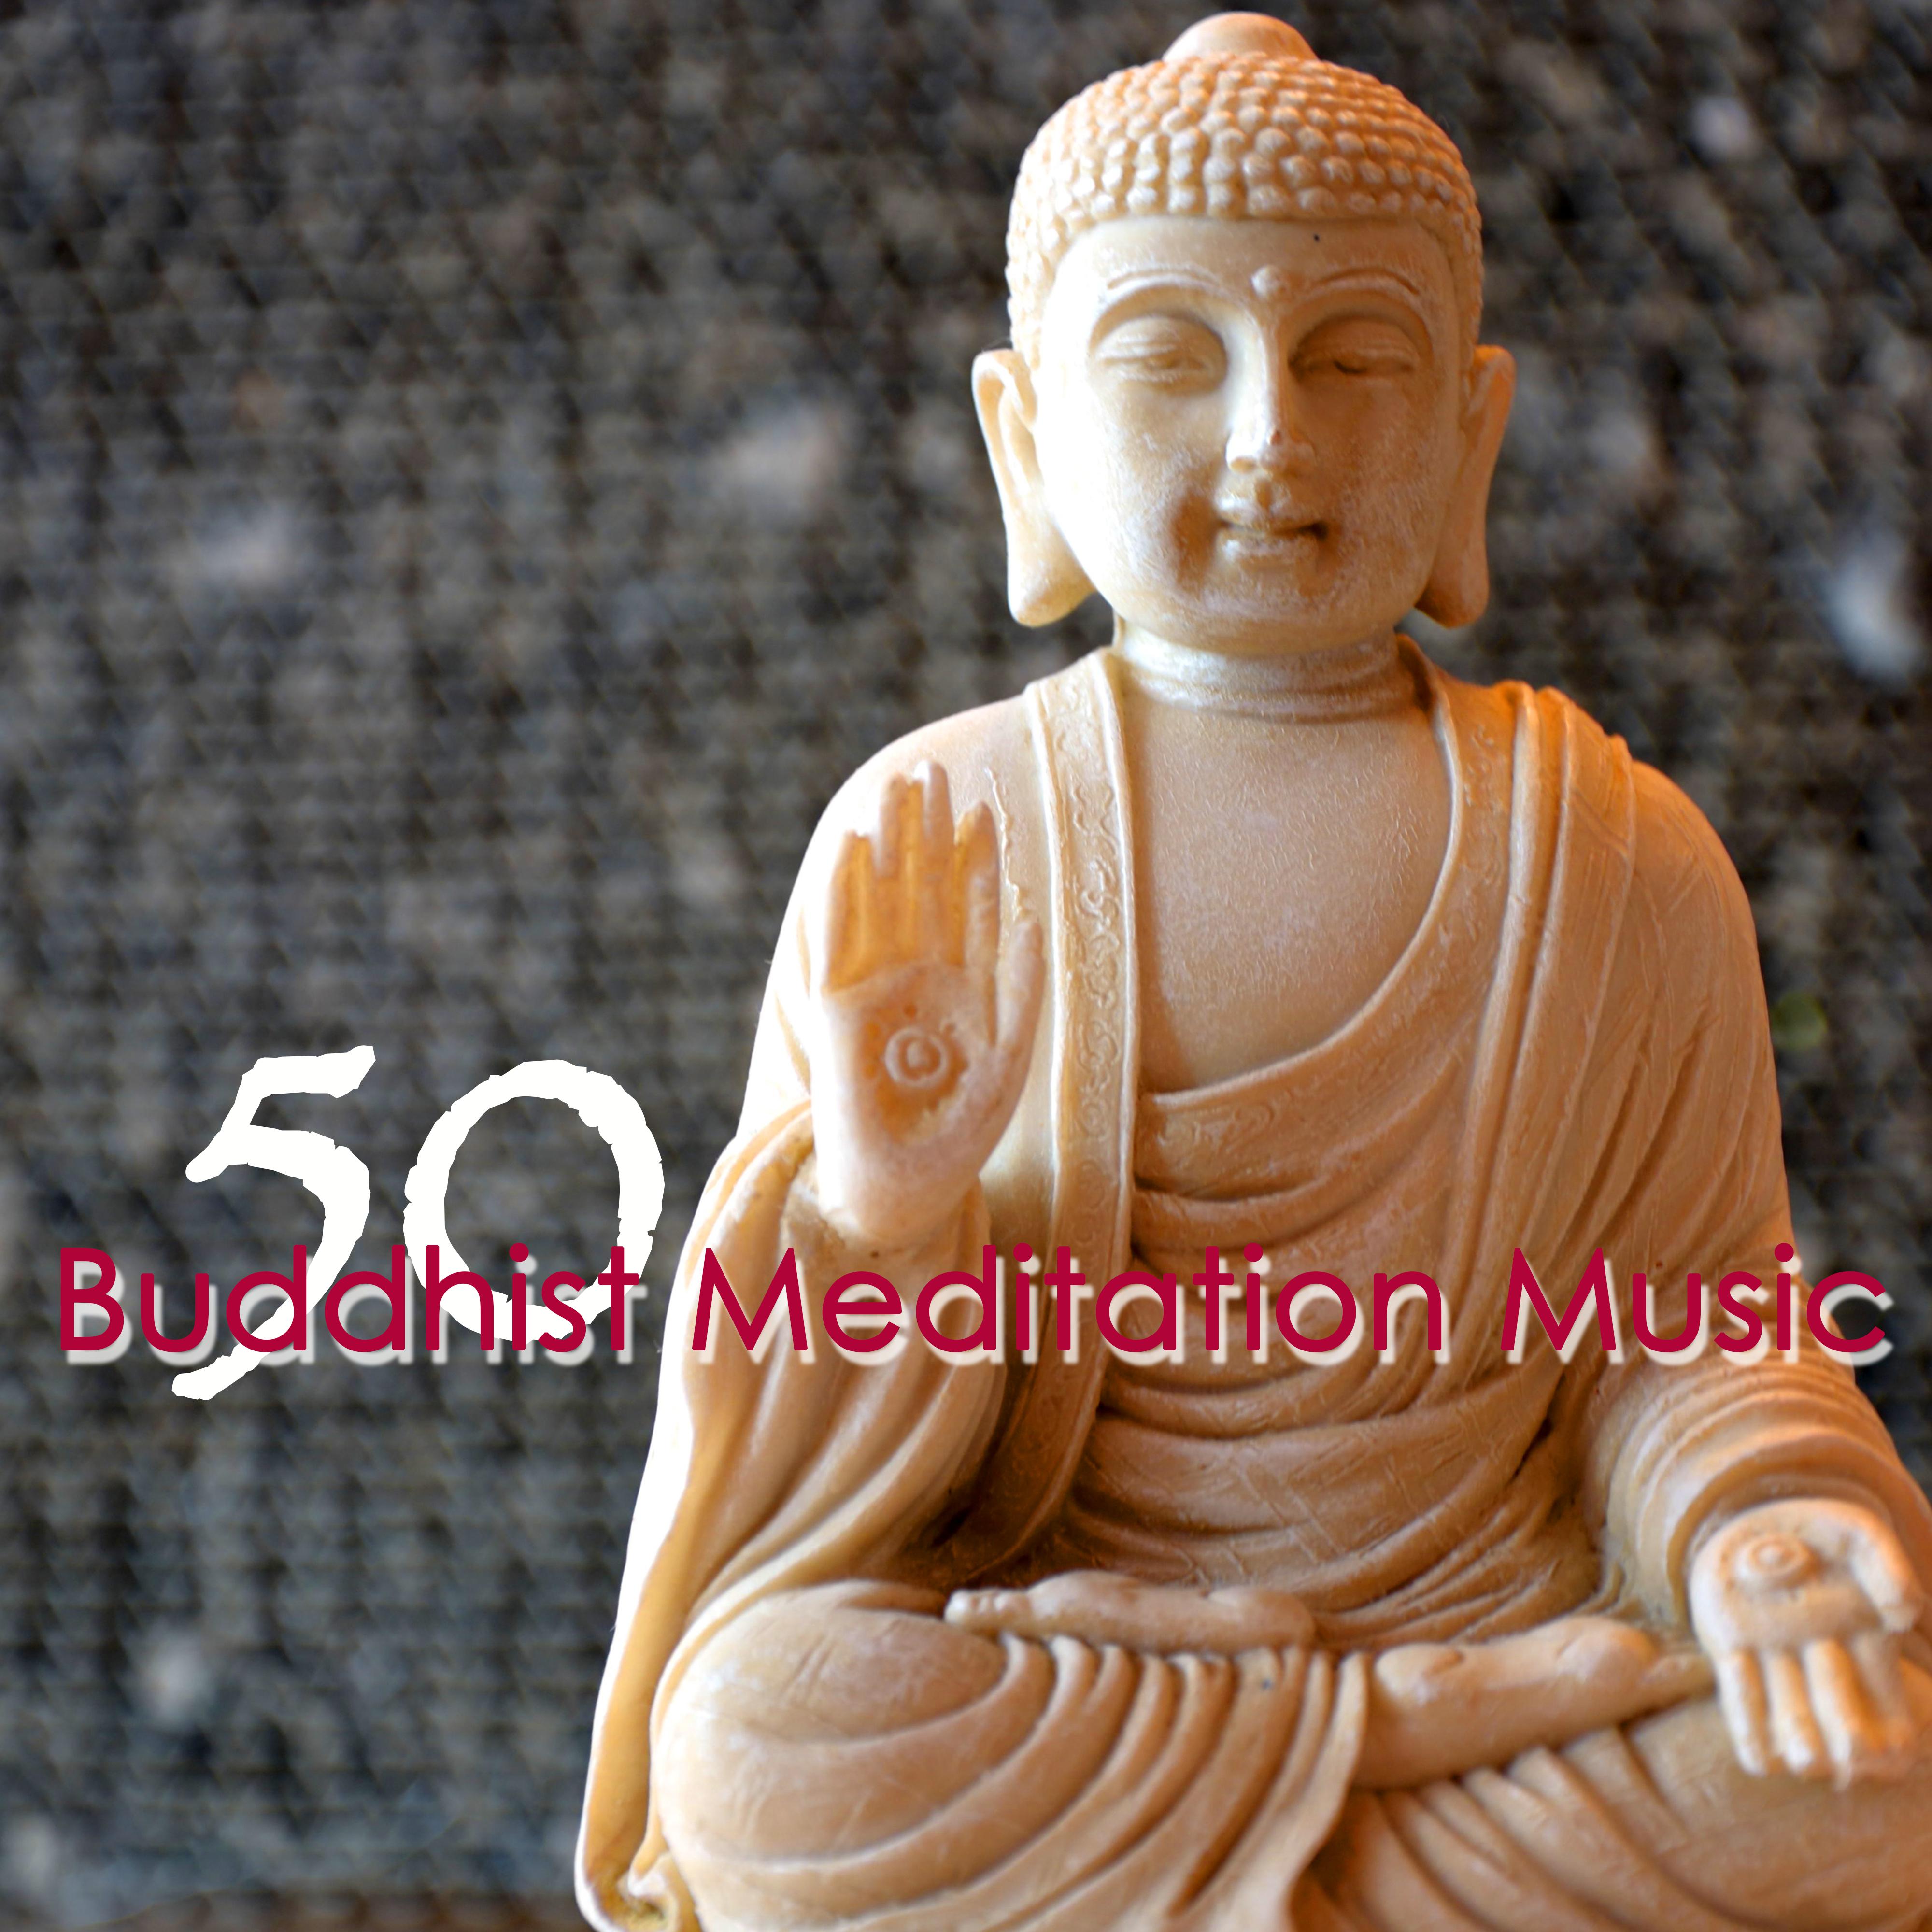 Buddhist Meditation Music: 50 Tibet Asian Background Music, Relaxing Songs and Sounds of Nature for Yoga Space & Zen Meditation